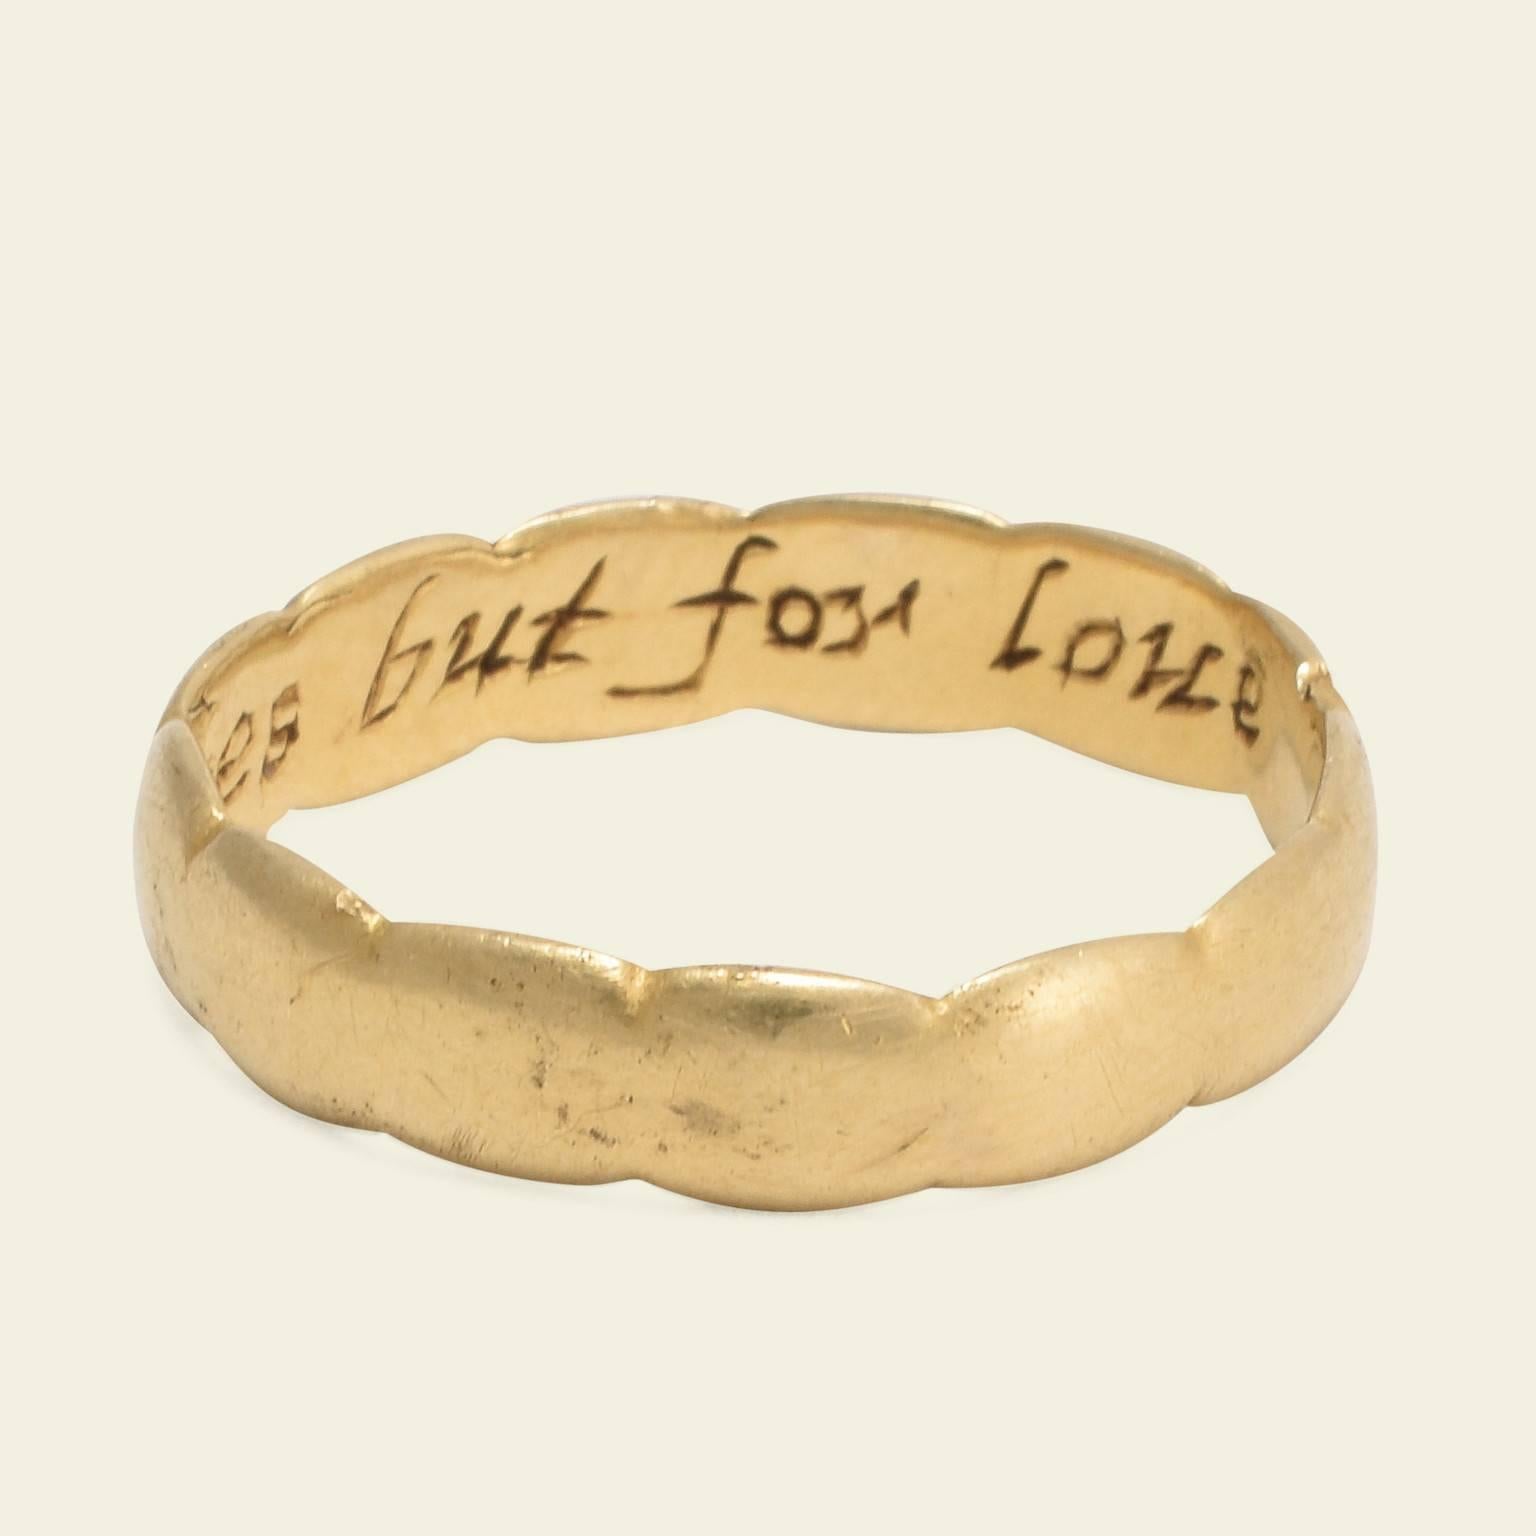 This incredible high karat gold post-Medieval poesy ring reads 